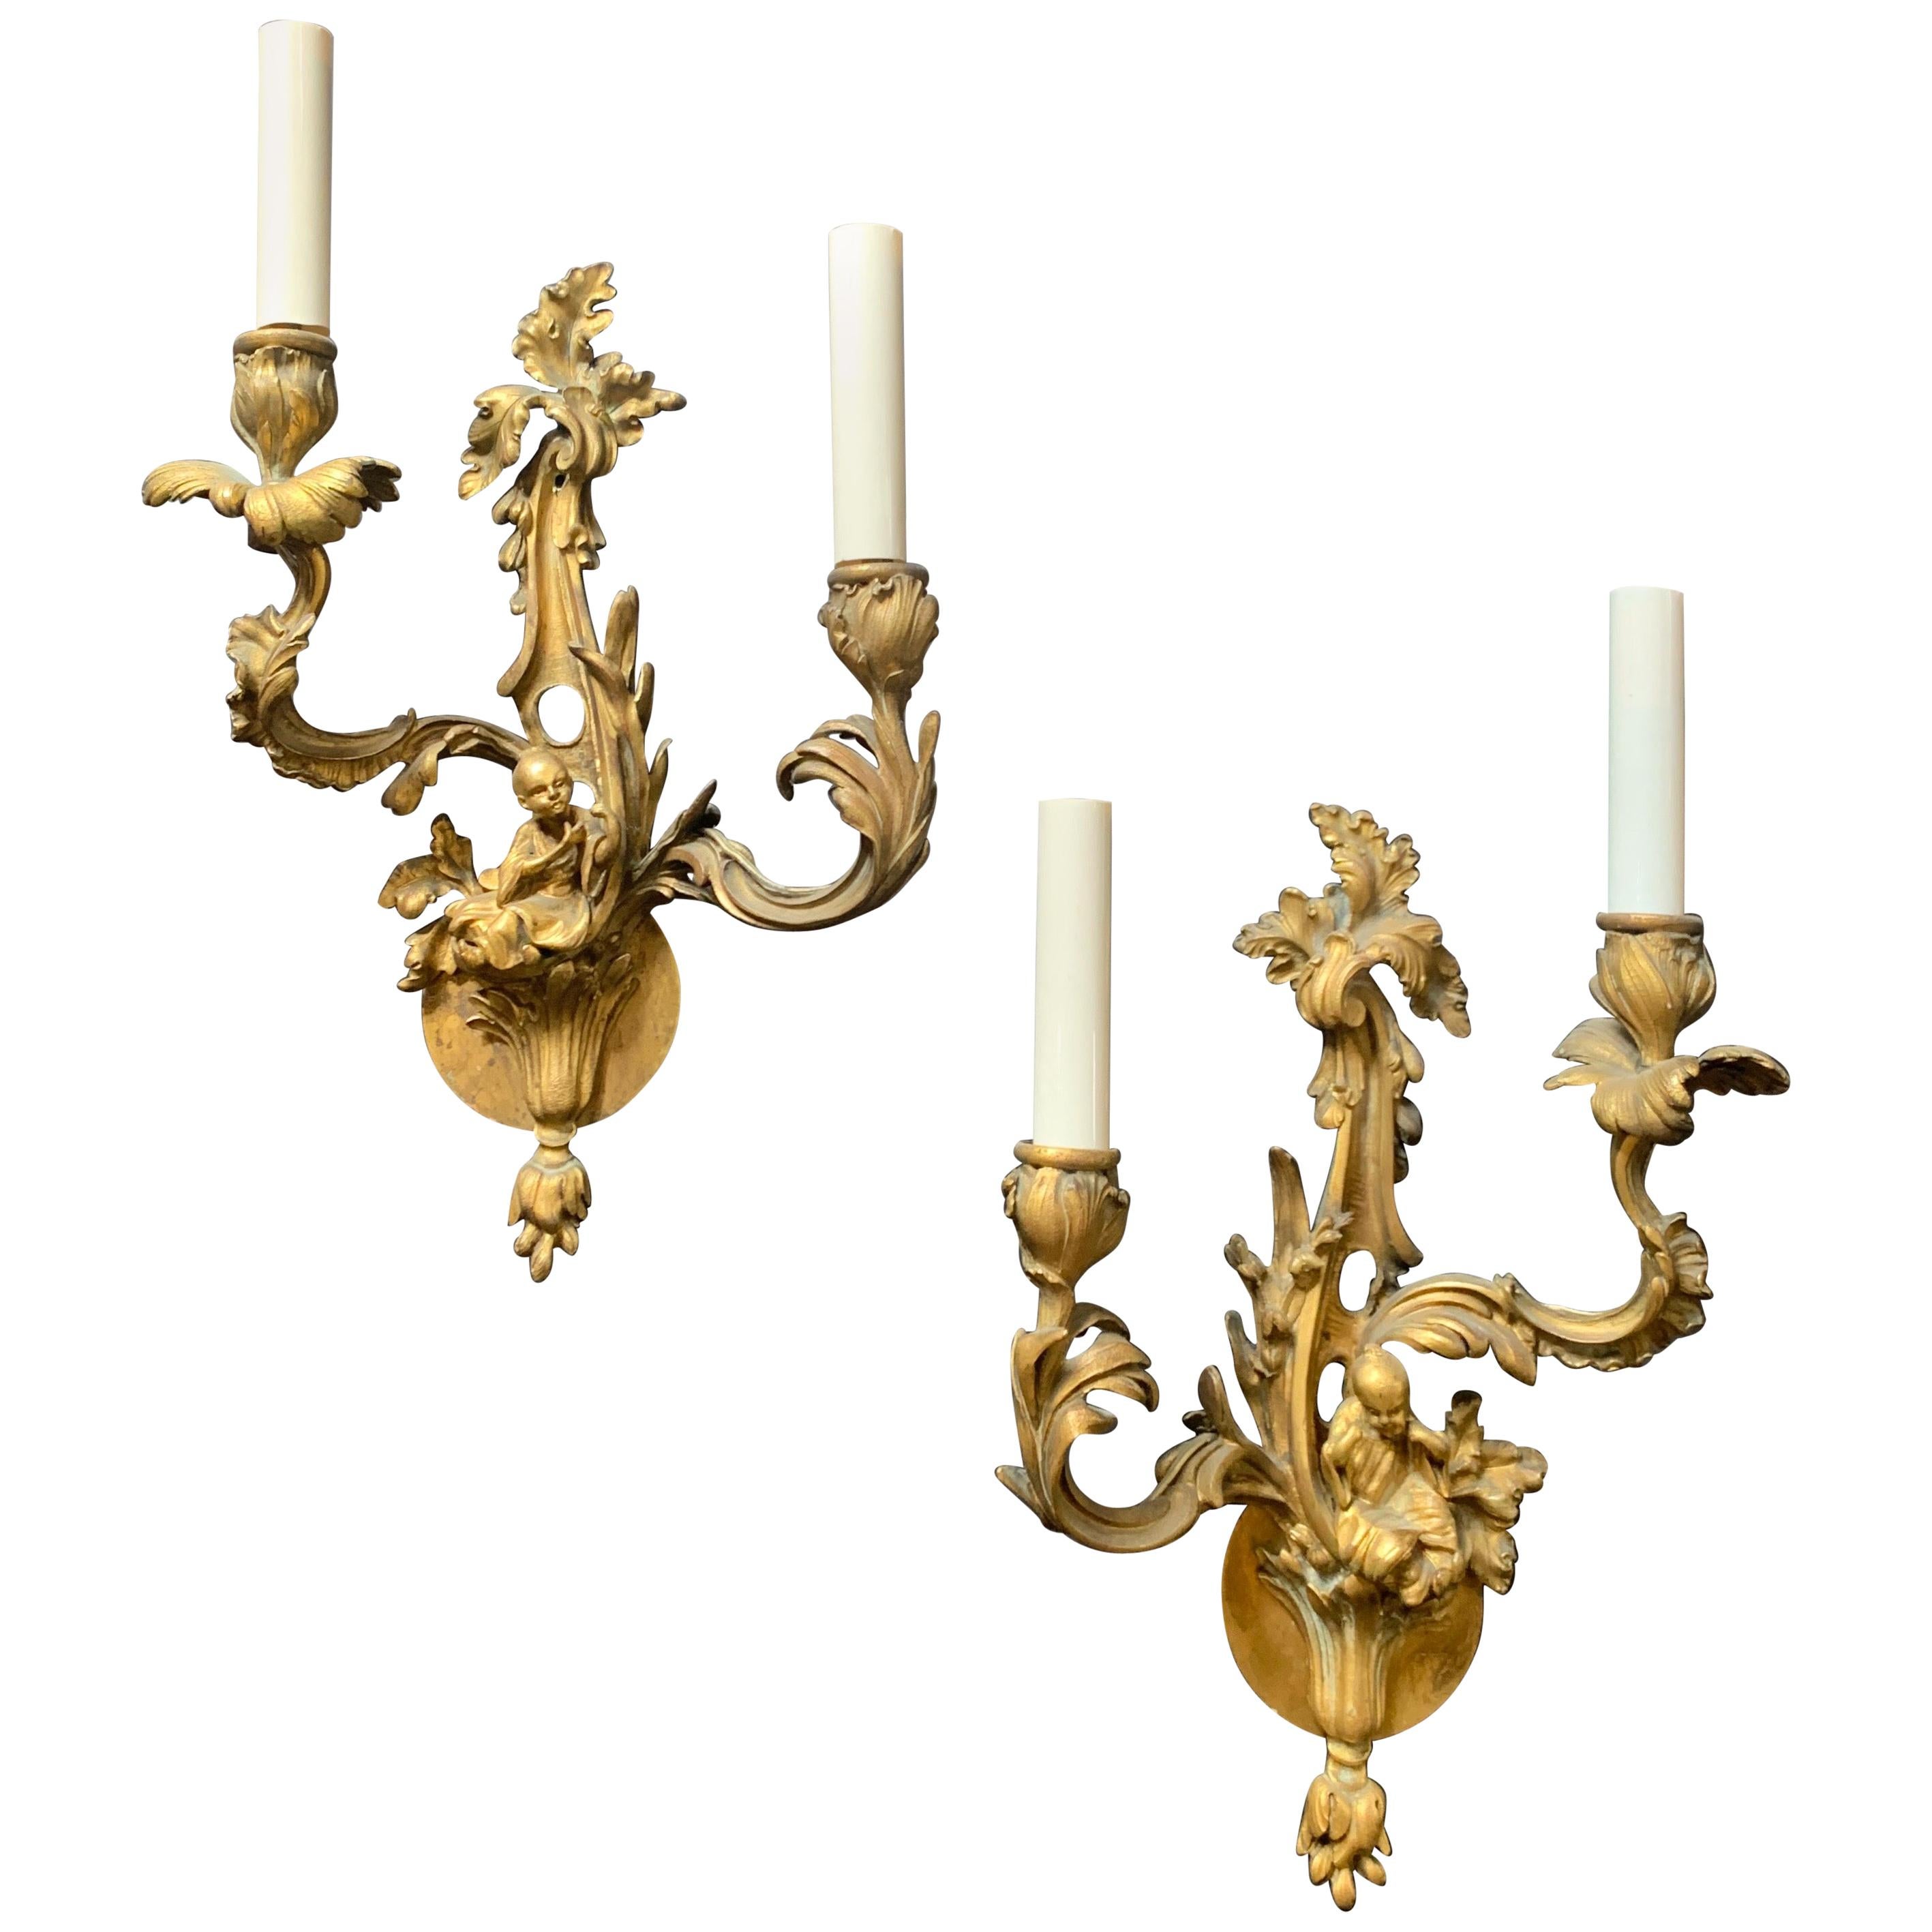 Wonderful Pair of French Dore Bronze Rococo Figural Chinoiserie 2-Light Sconces